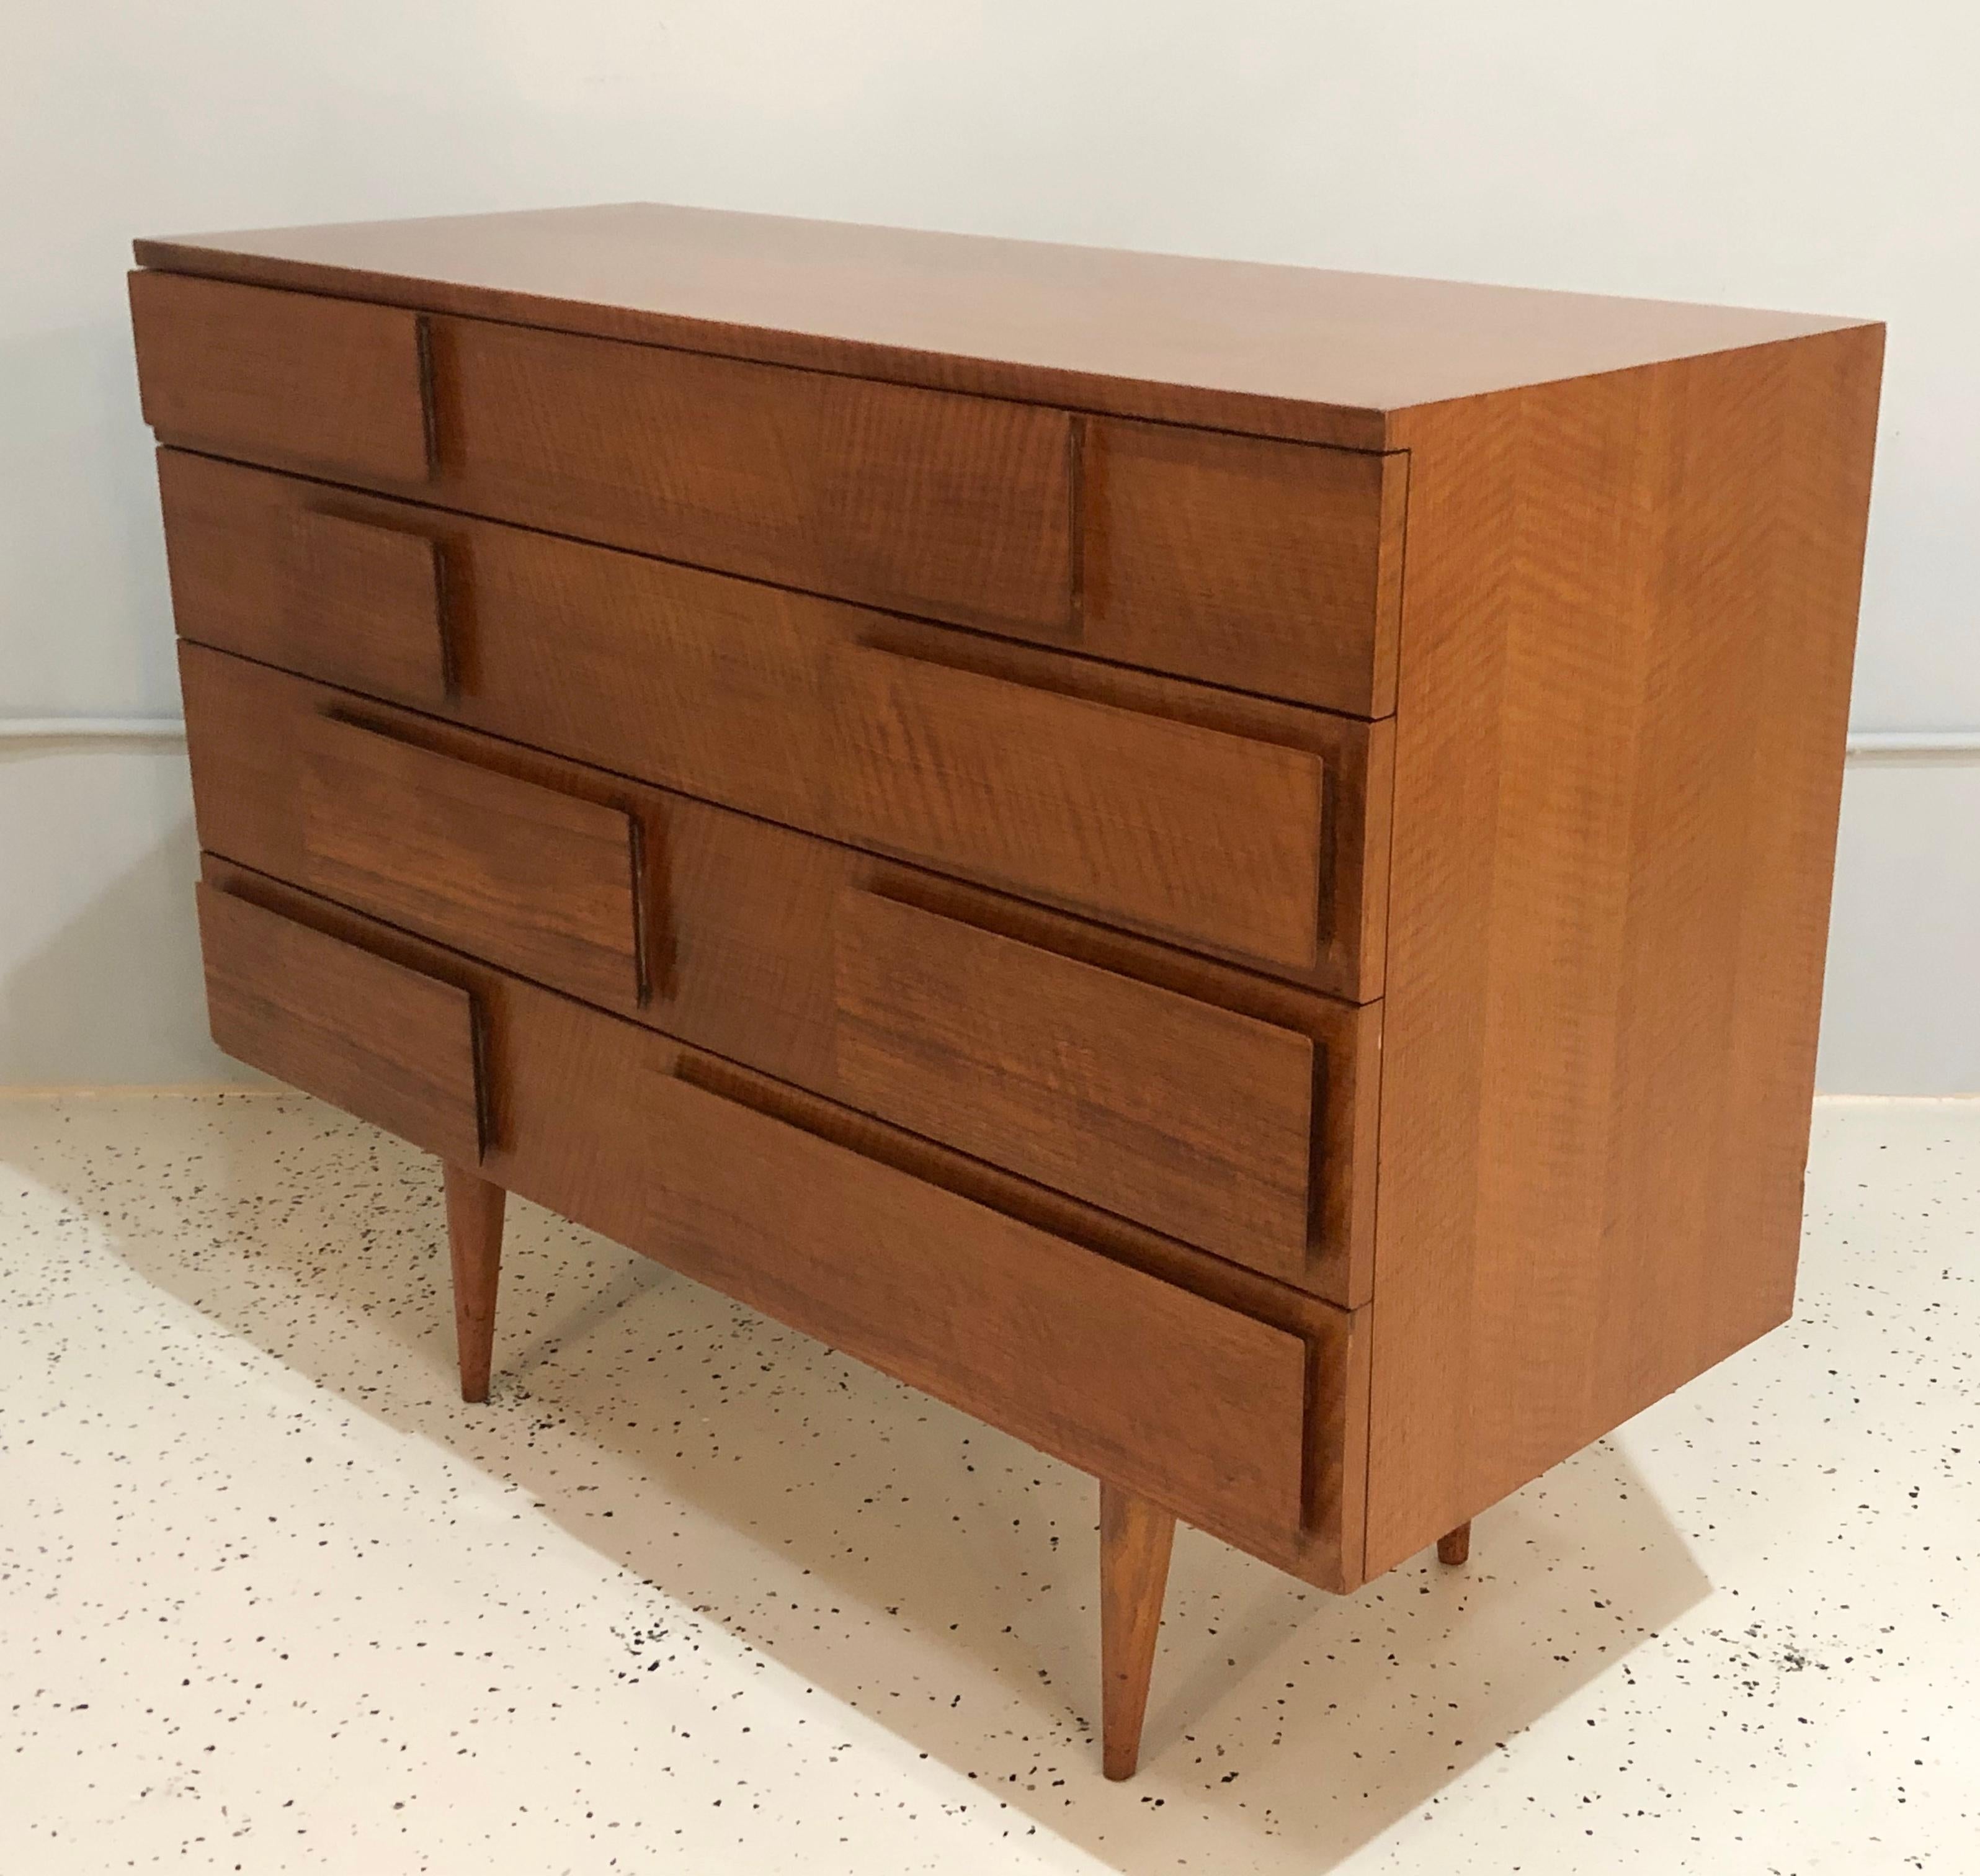 Mid-20th Century Pair of Gio Ponti Chests for Singer & Sons, Model 2129, circa 1955